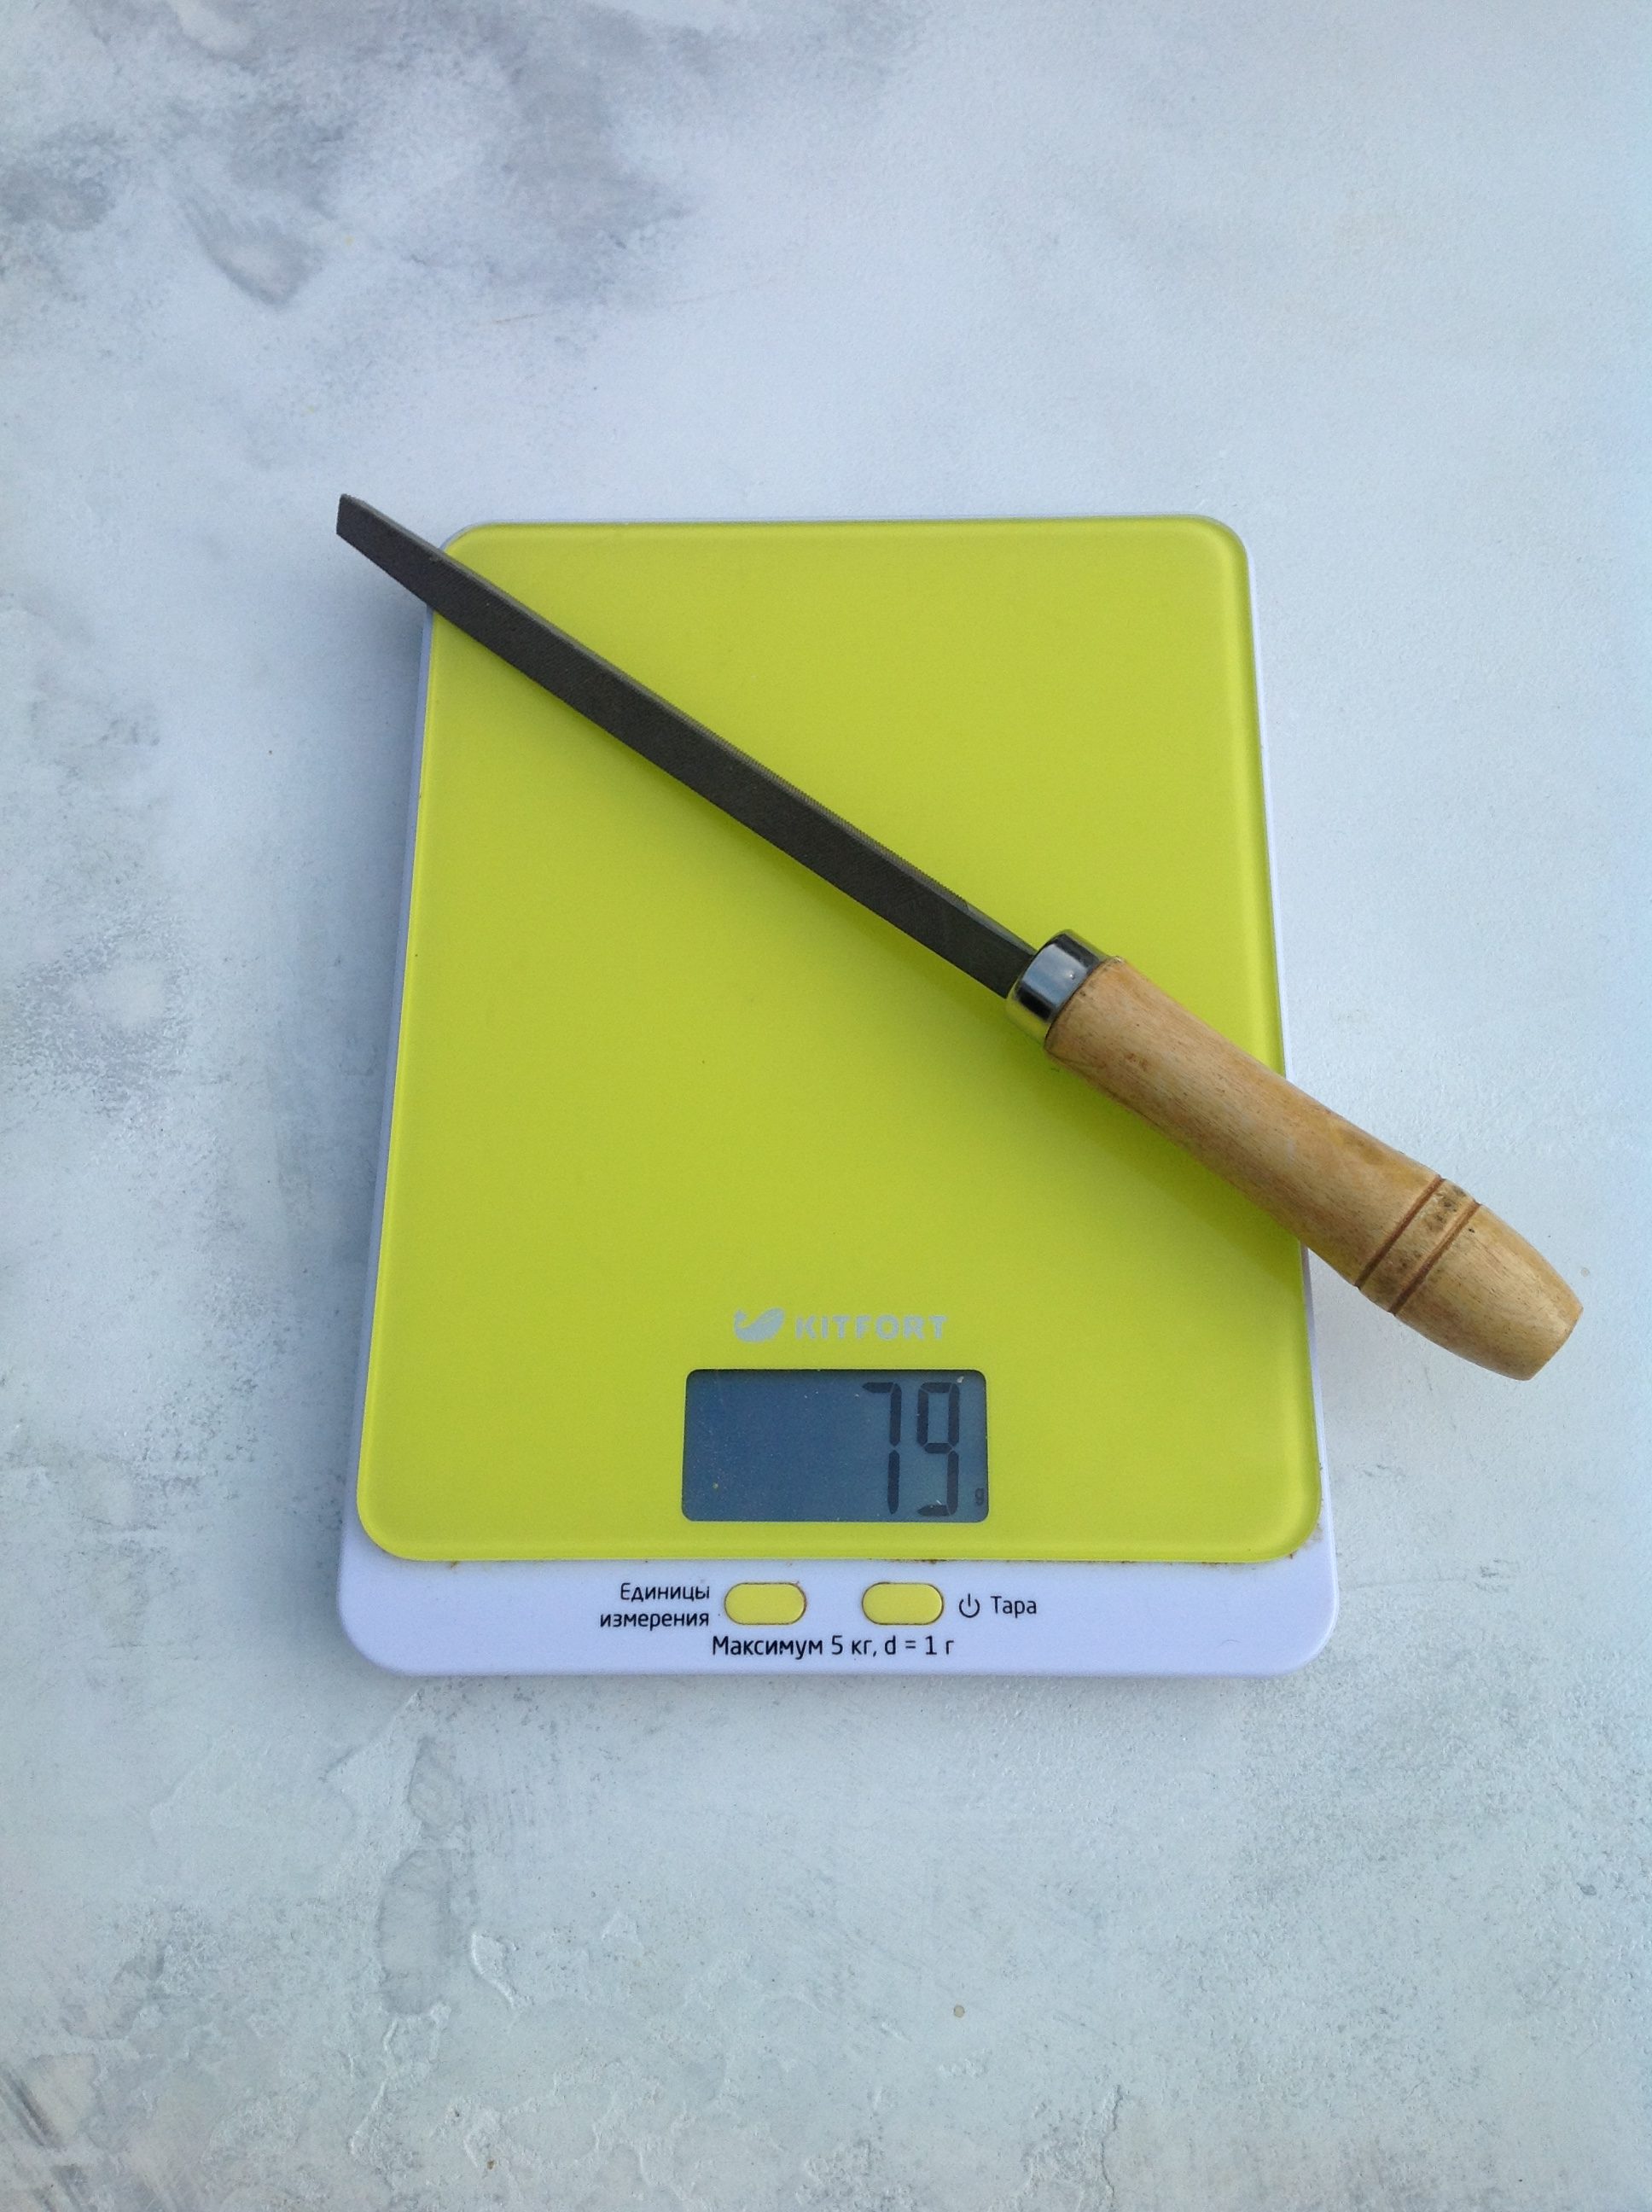 weight of a triangular file